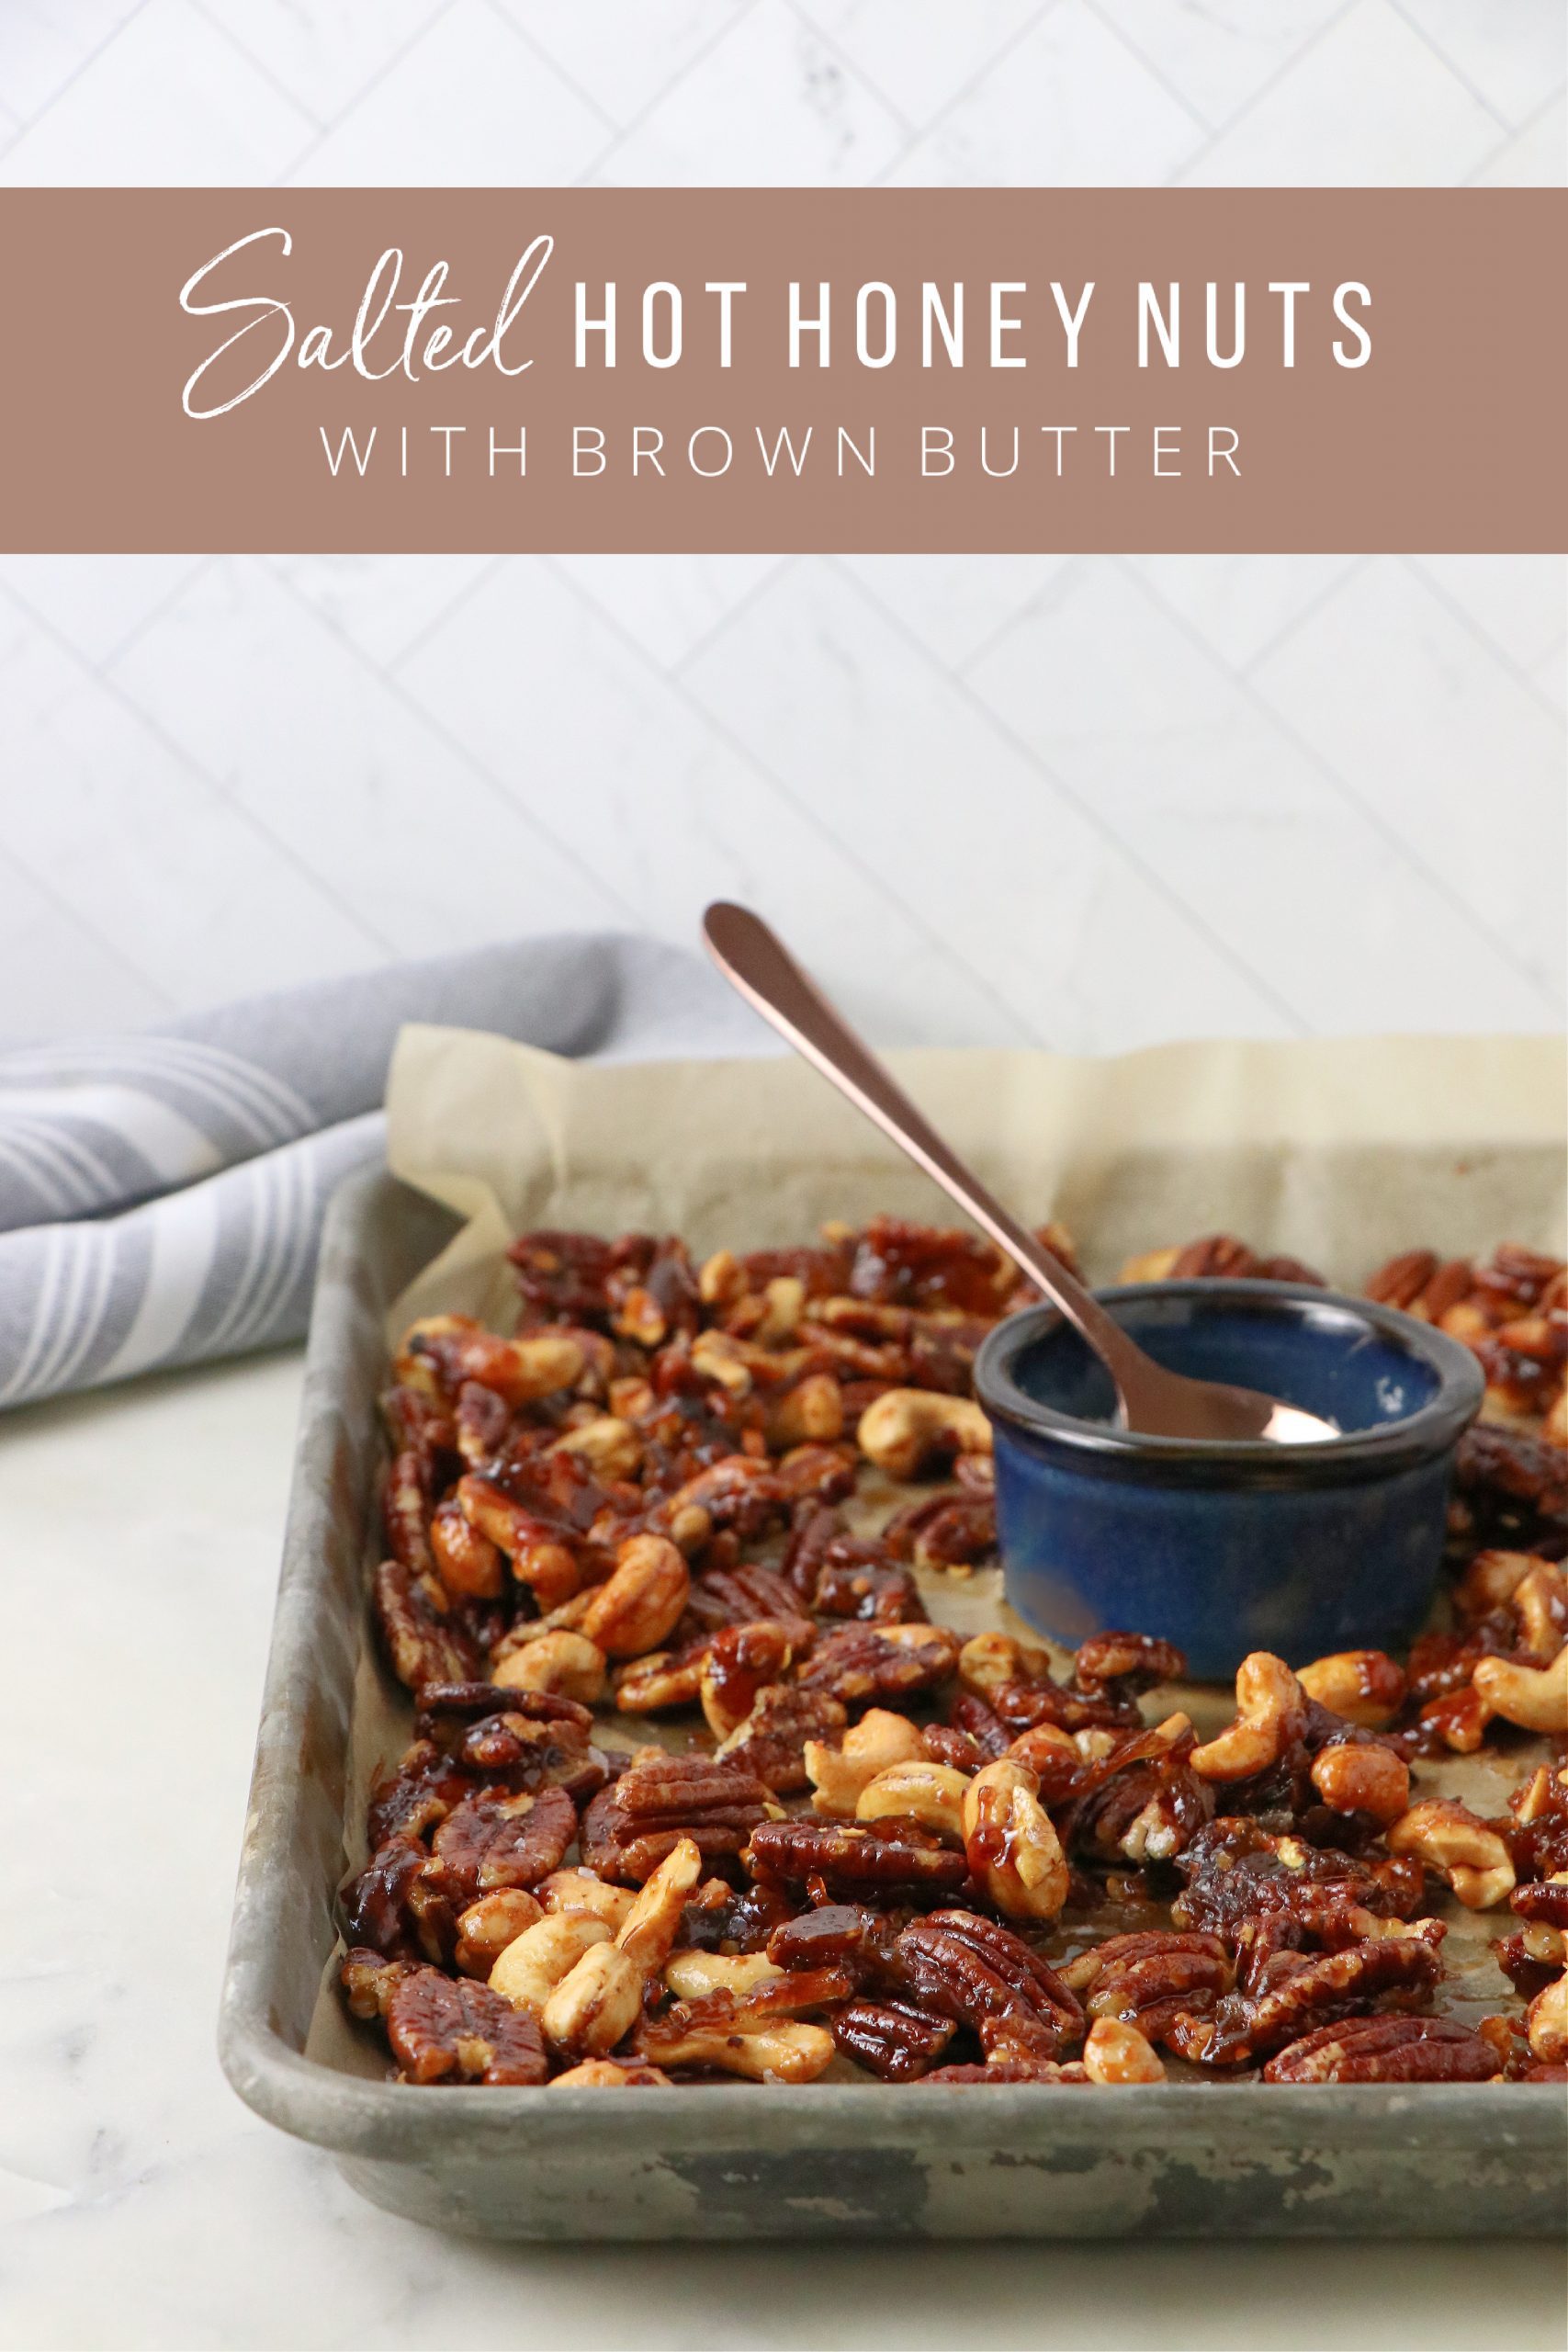 Vegan Salted Hot Honey Nuts with Brown Butter - Labeless Nutrition